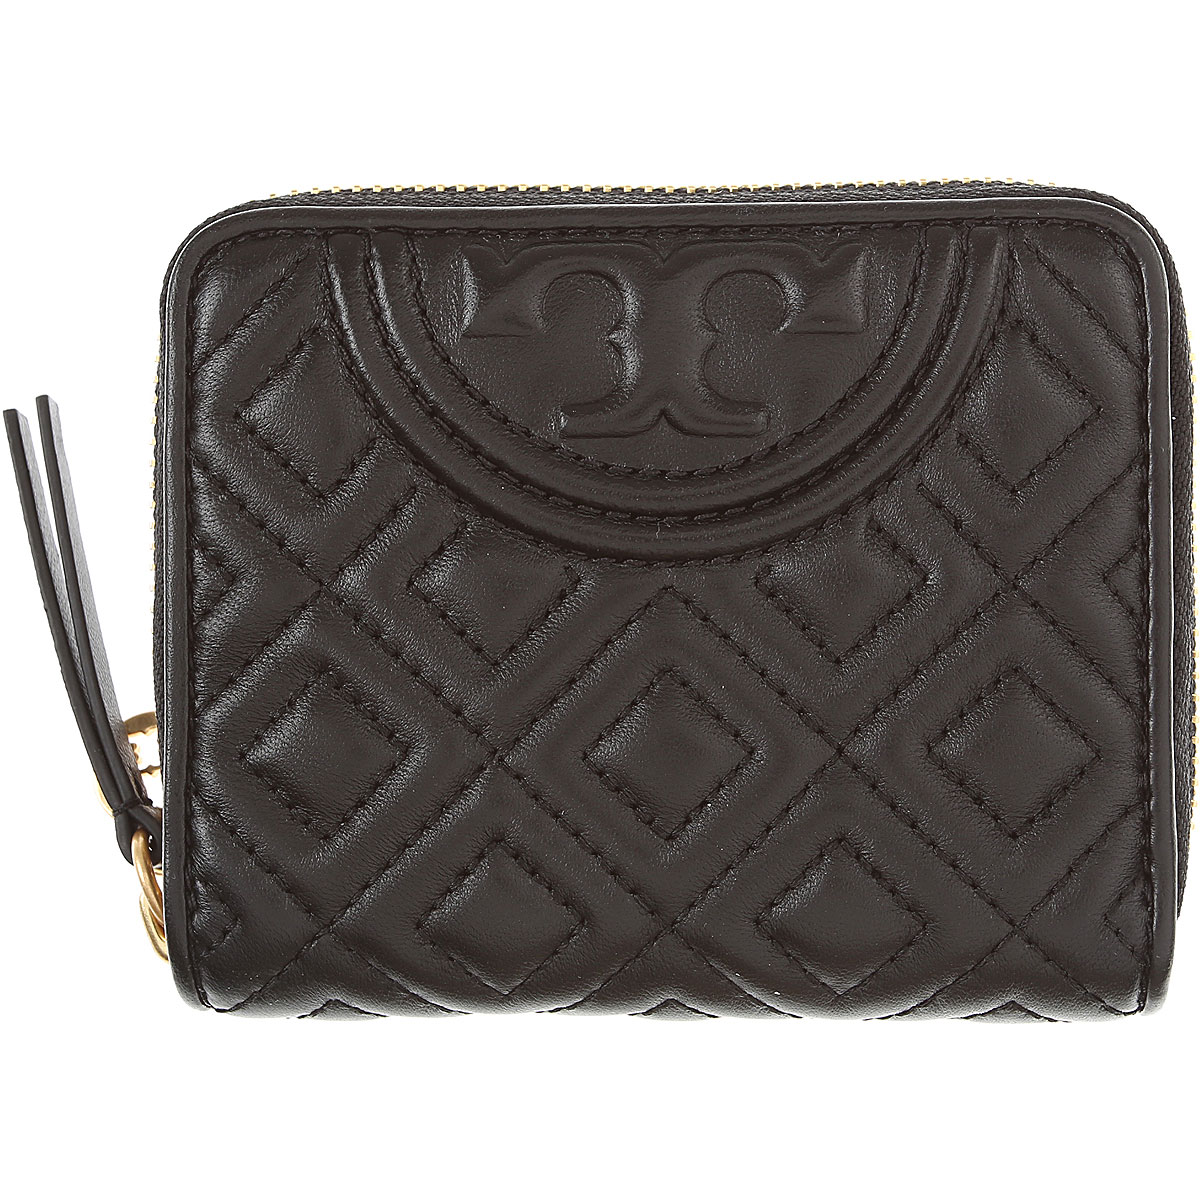 Womens Wallets Tory Burch, Style code: 50264-001-